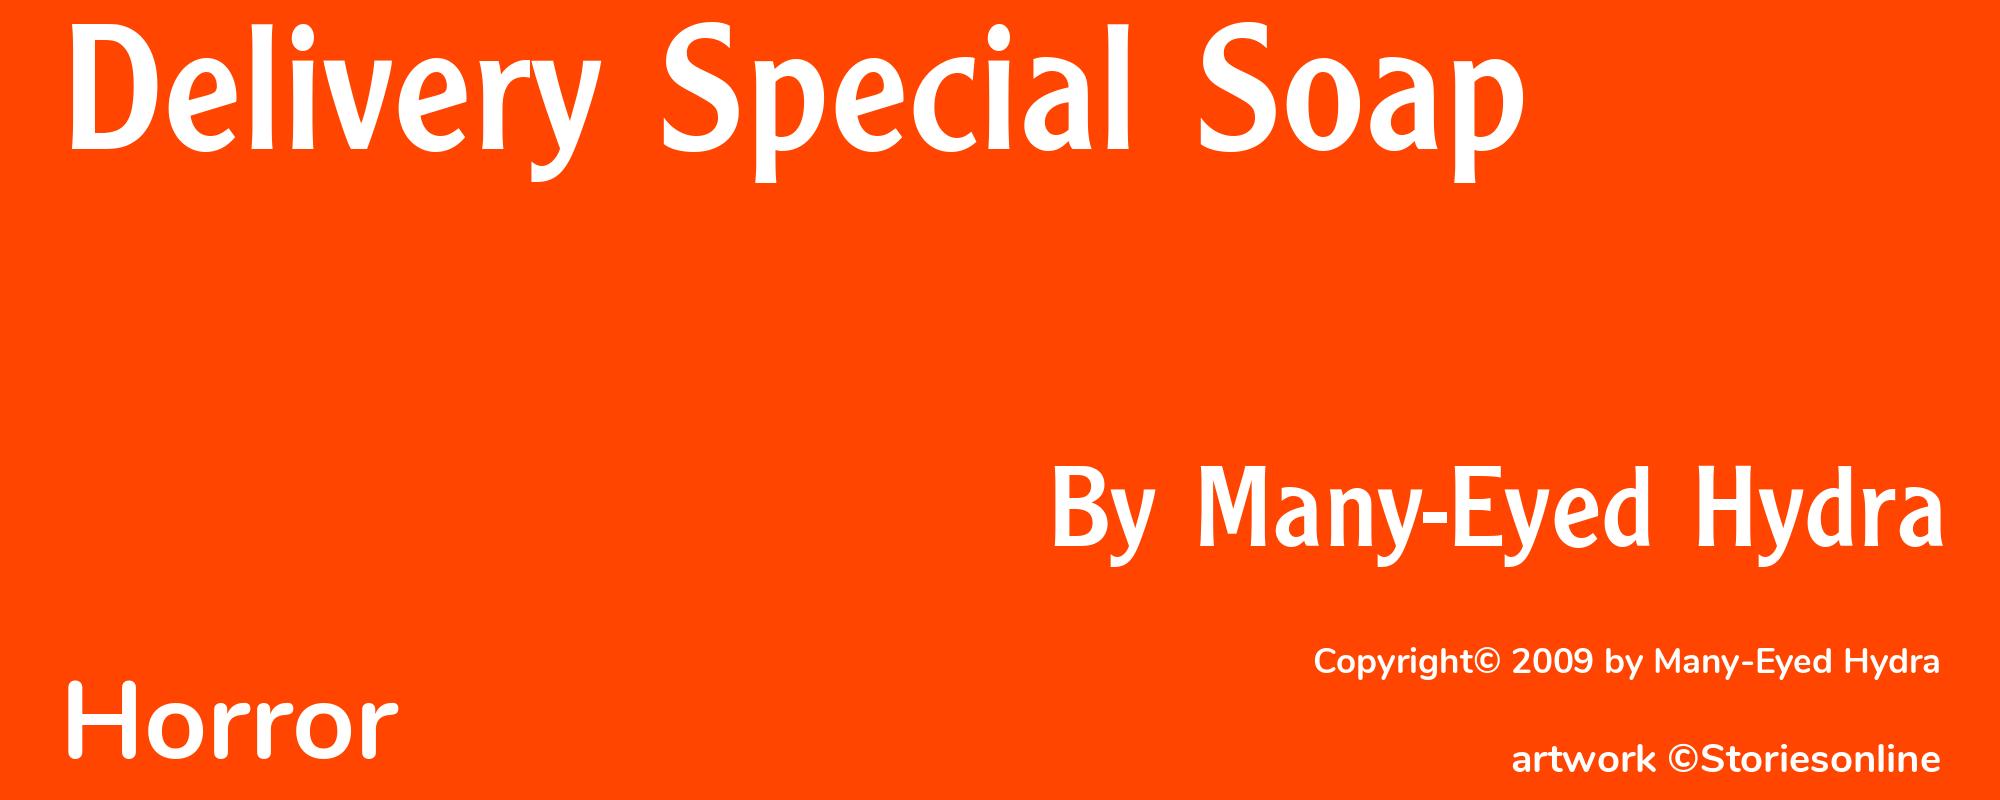 Delivery Special Soap - Cover